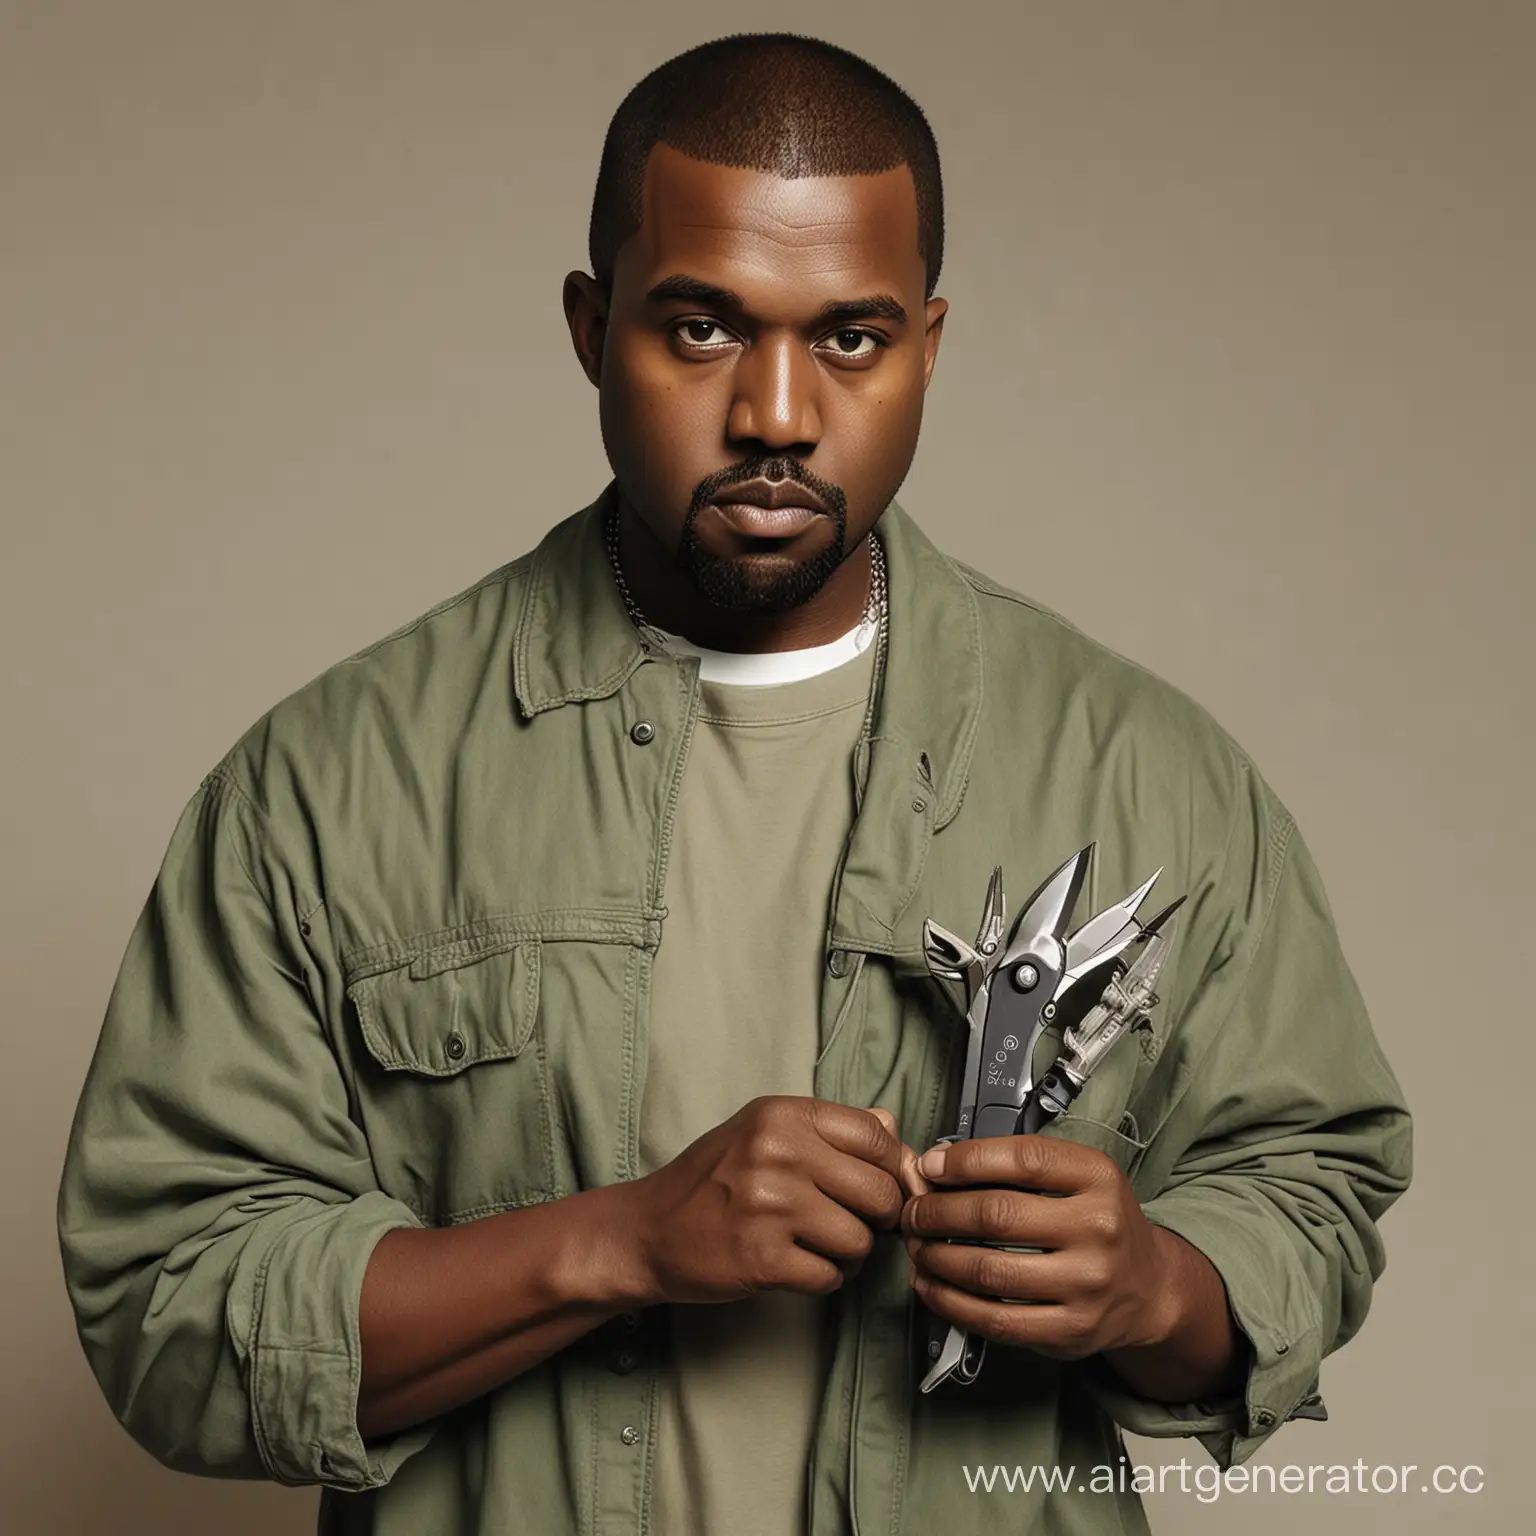 Kanye West is holding a pruning shears.